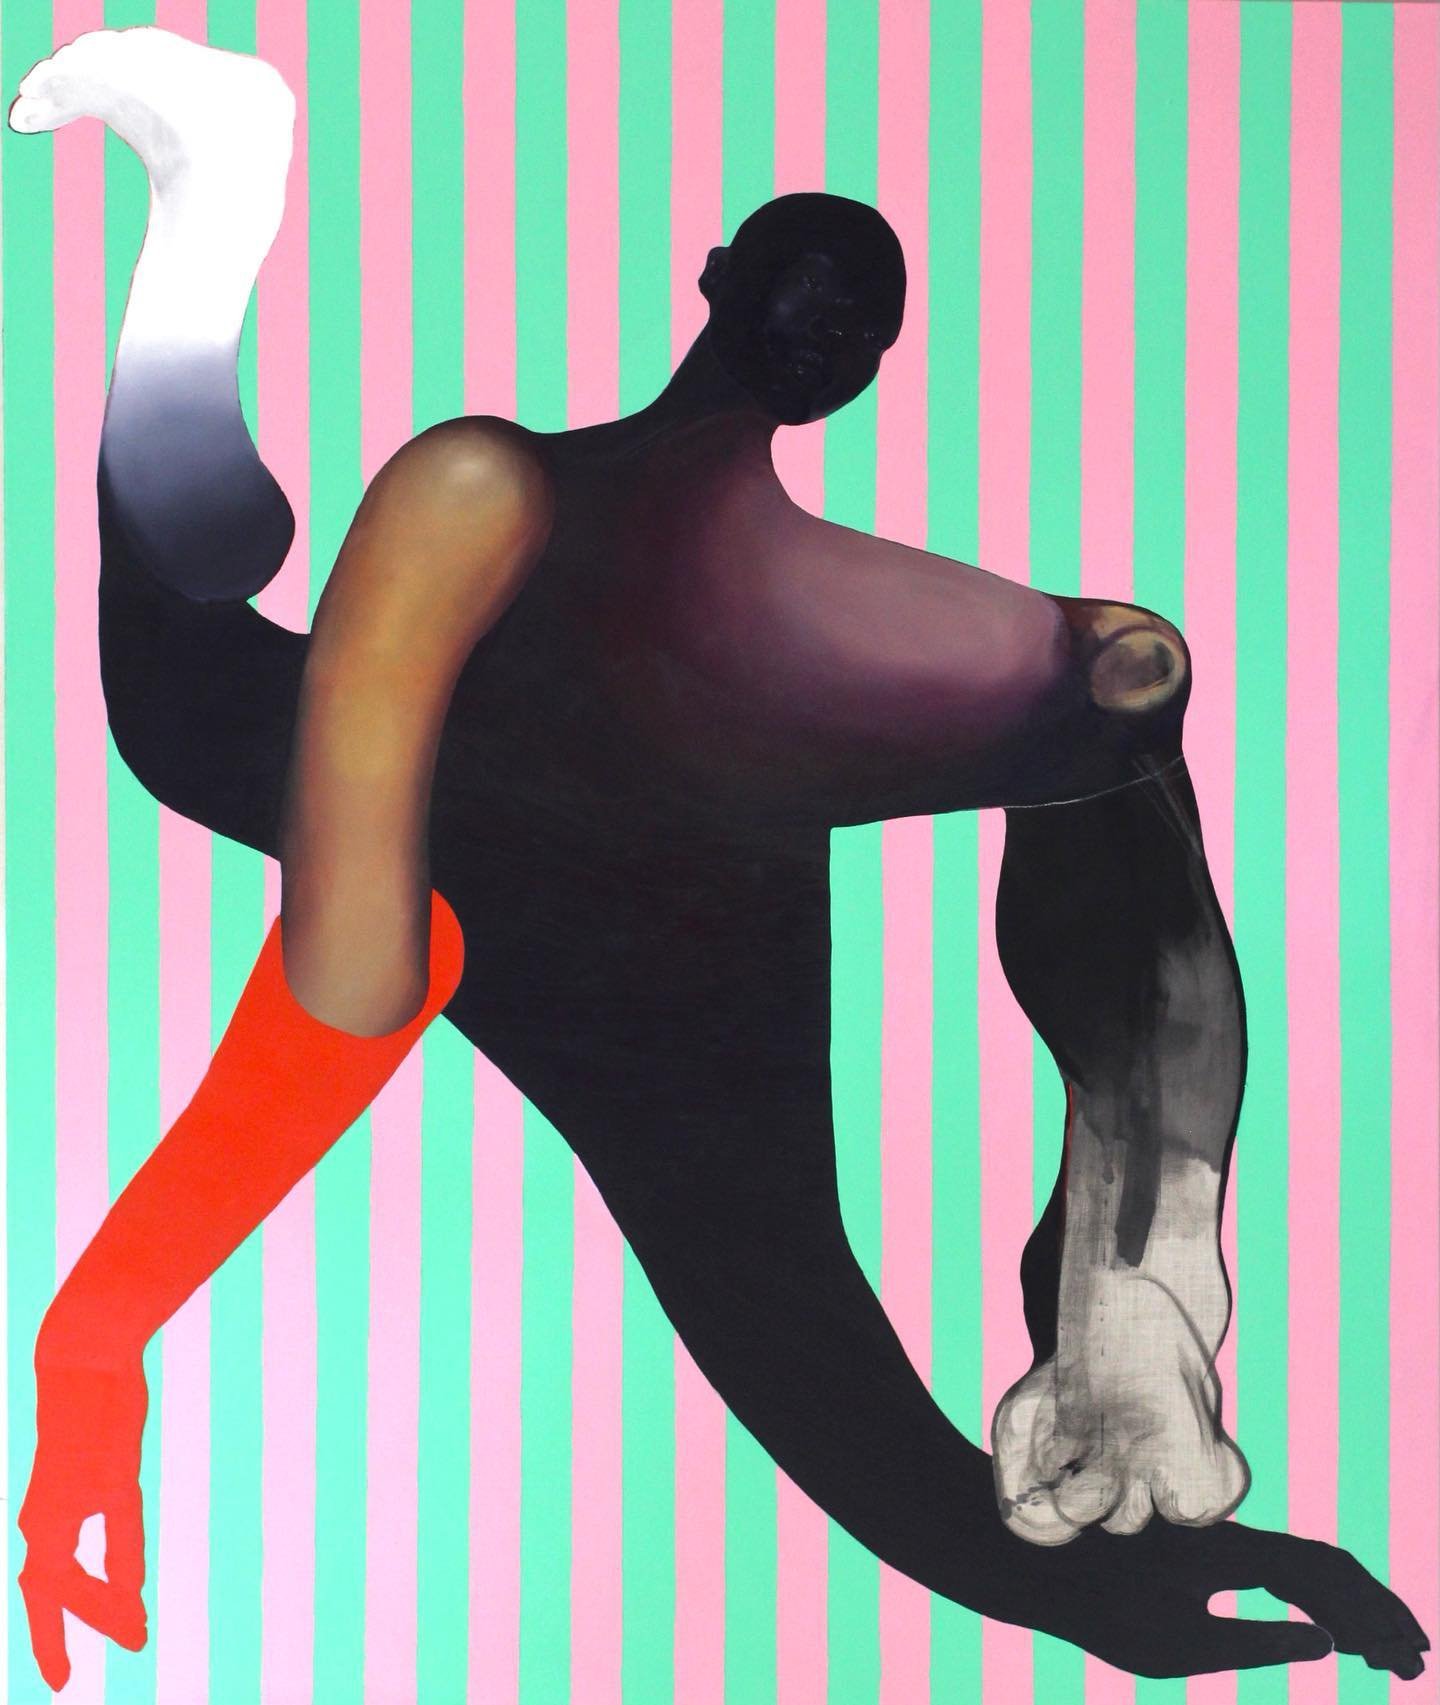 The Acrobat,
60x50, from @matthewhanceart just arrived!